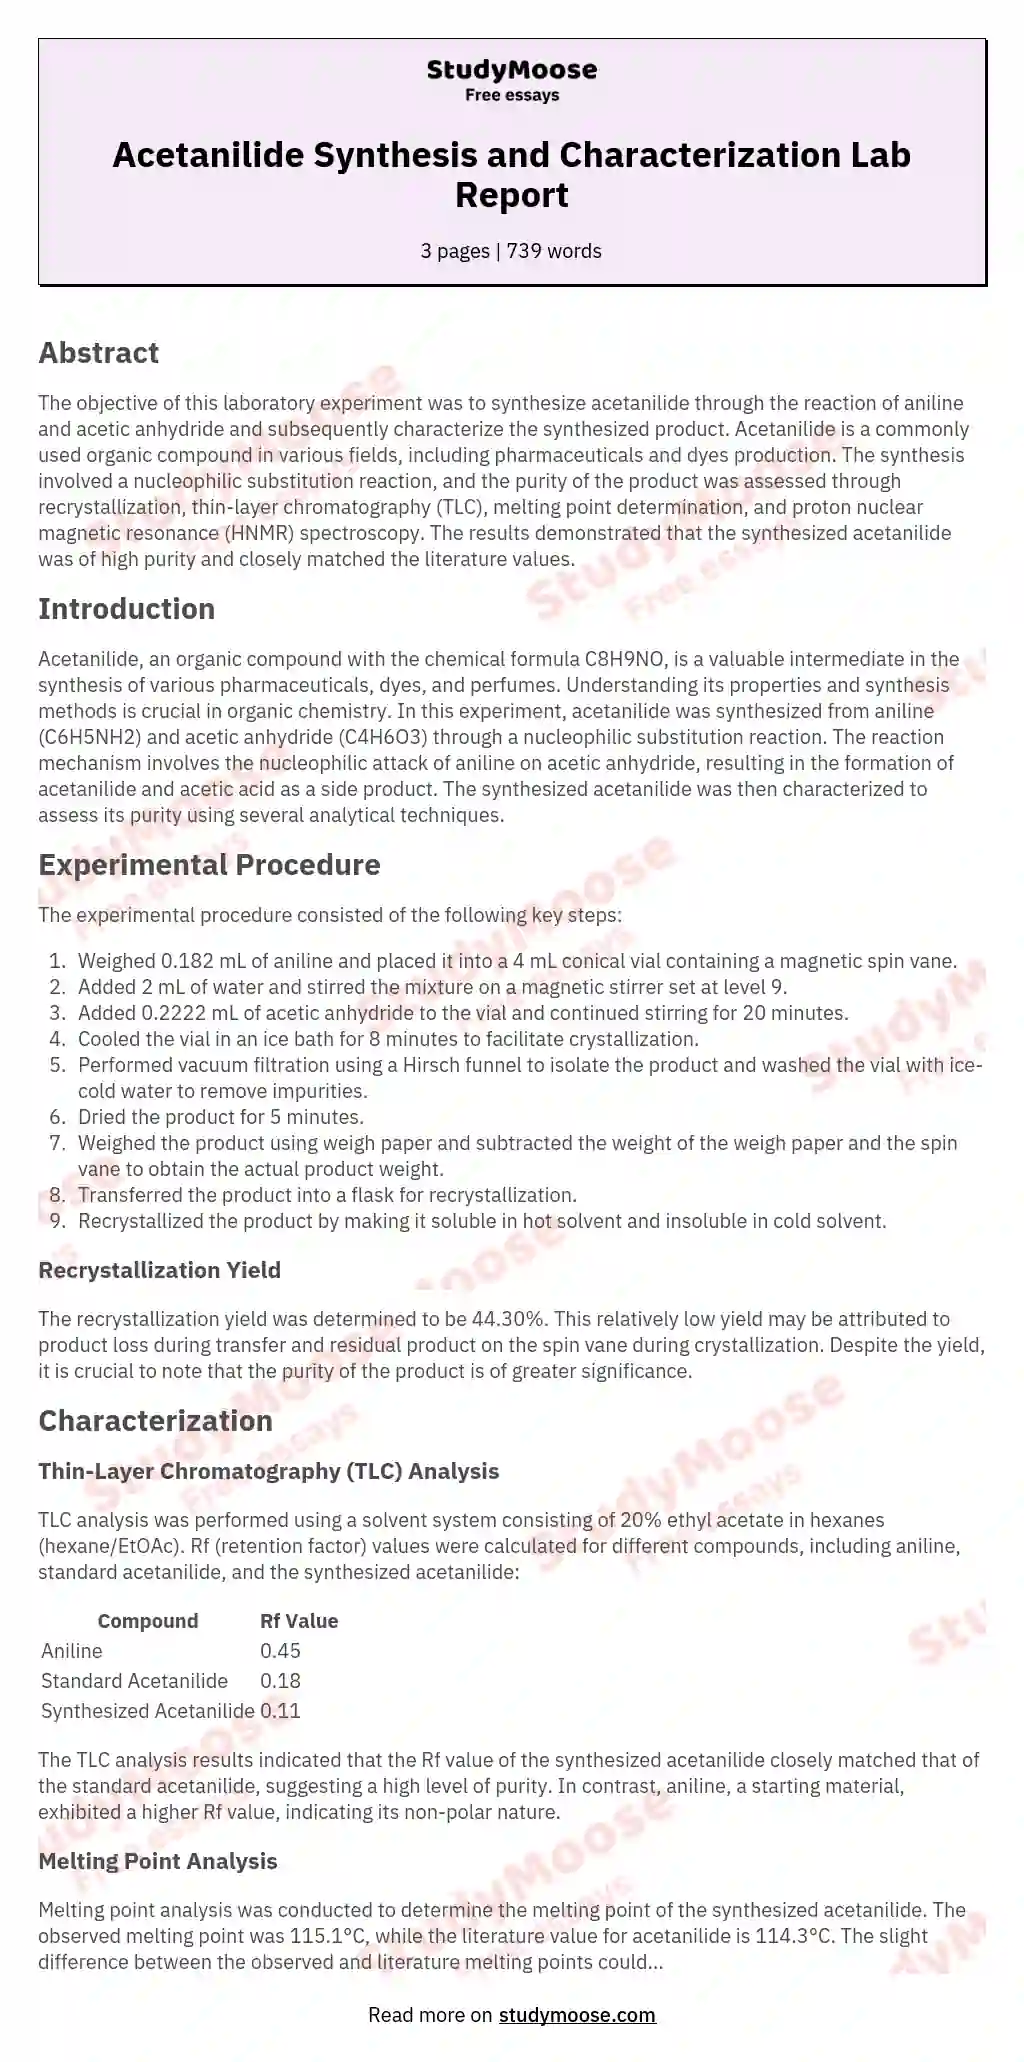 Acetanilide Synthesis and Characterization Lab Report essay